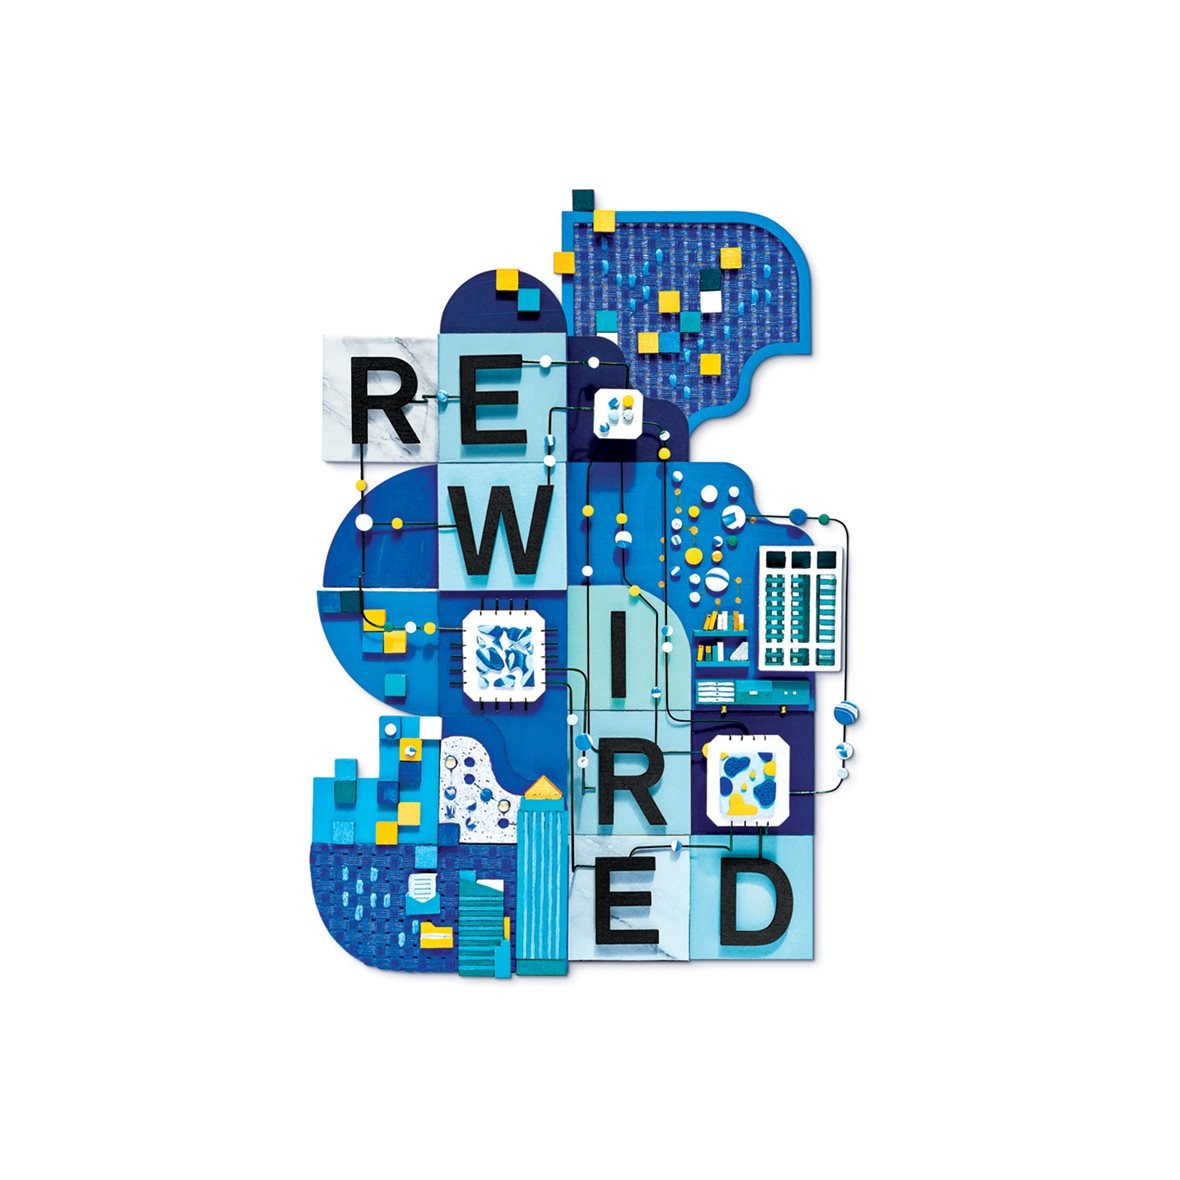 McKinsey Quarterly Cover for Vol. 59, No. 3 - The word "REWIRED" written in blocks staggered down the cover page